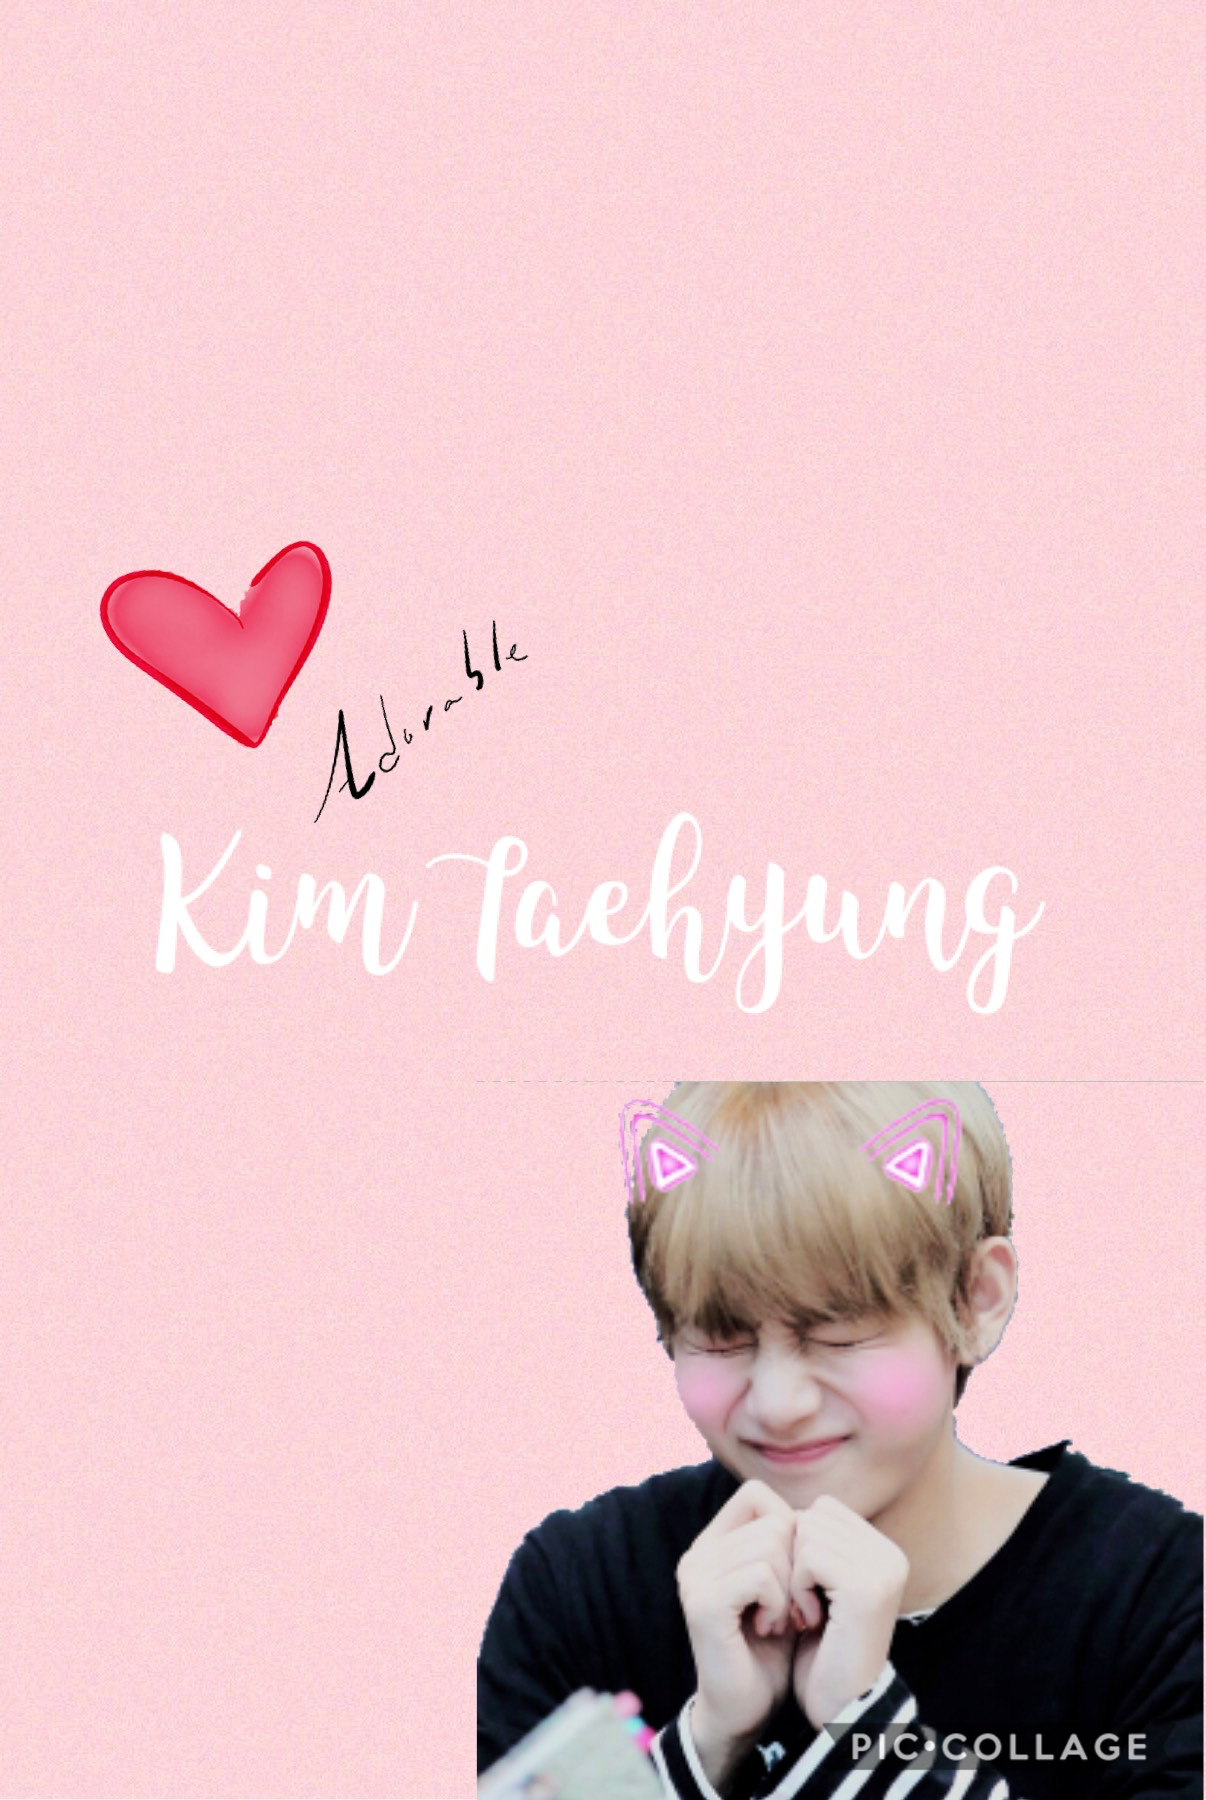 Idk why I made it I just love V ❤️